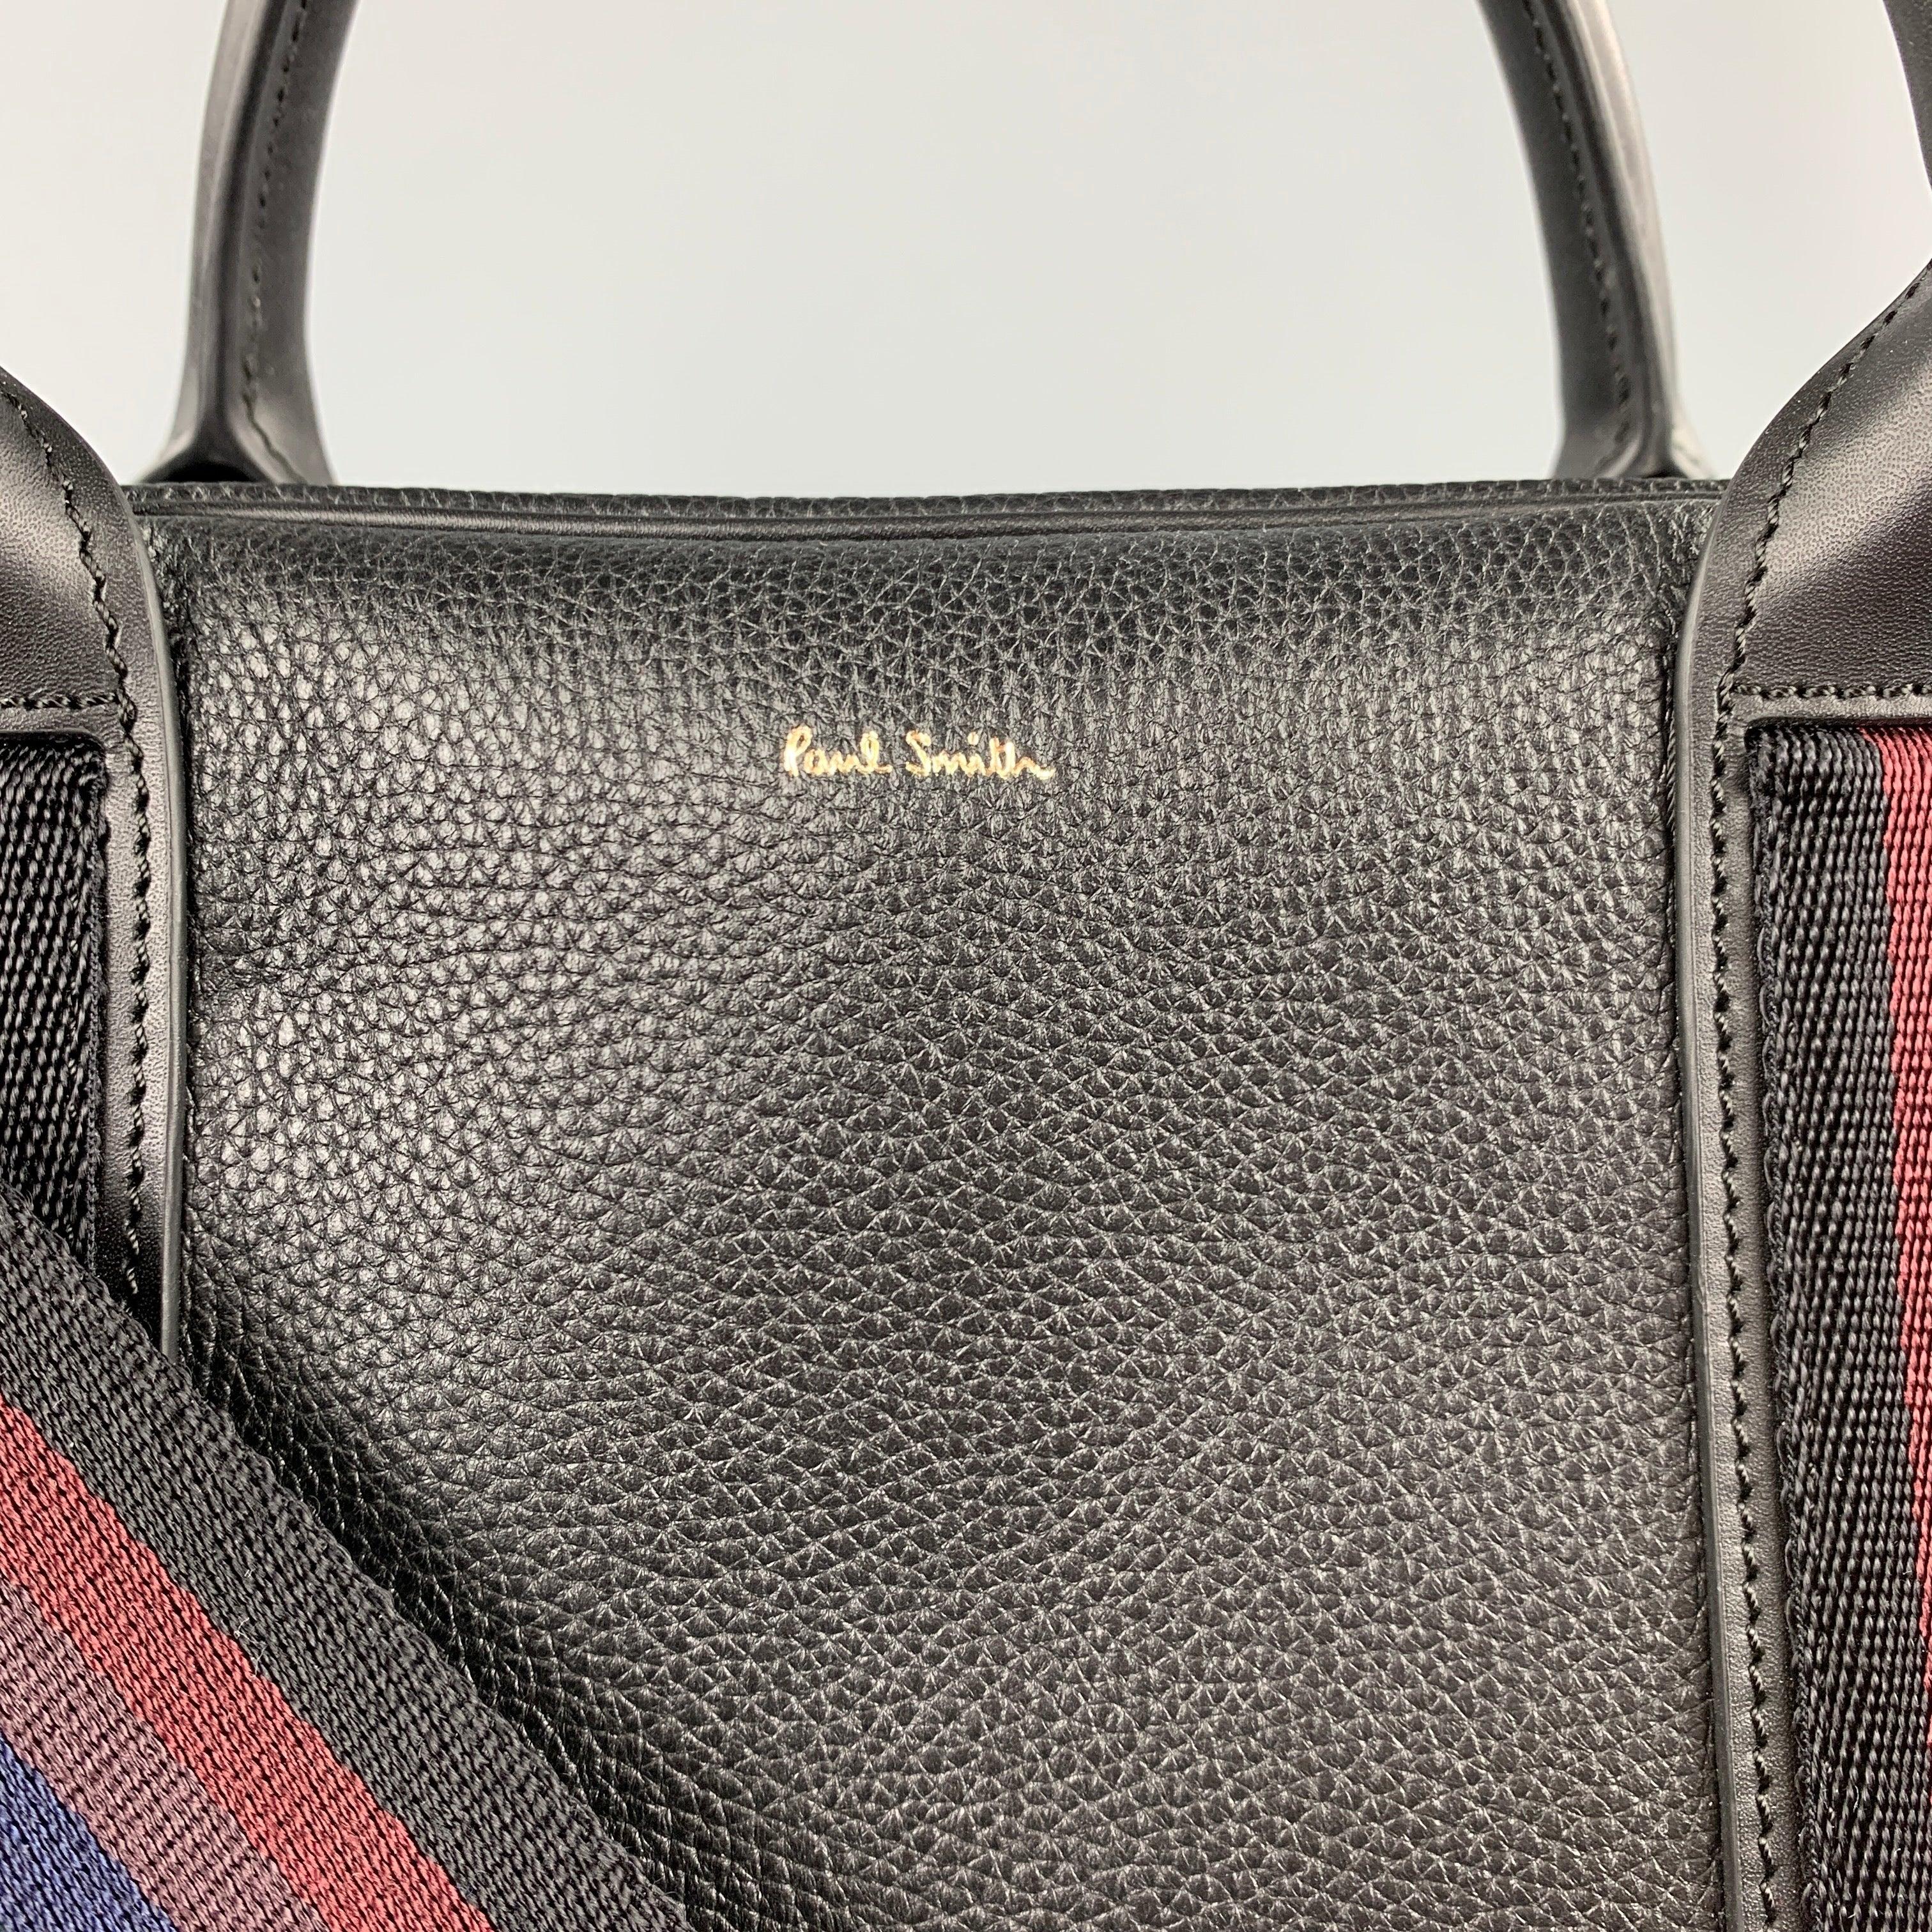 PAUL SMITH briefcase bag comes in a black pebble grain leather with a stripe trim featuring a shoulder strap, top handles, and a zipper closure.Very Good
Pre-Owned Condition. 

Measurements: 
  Length: 14 inches  Width: 5 inches  Height: 11 inches 